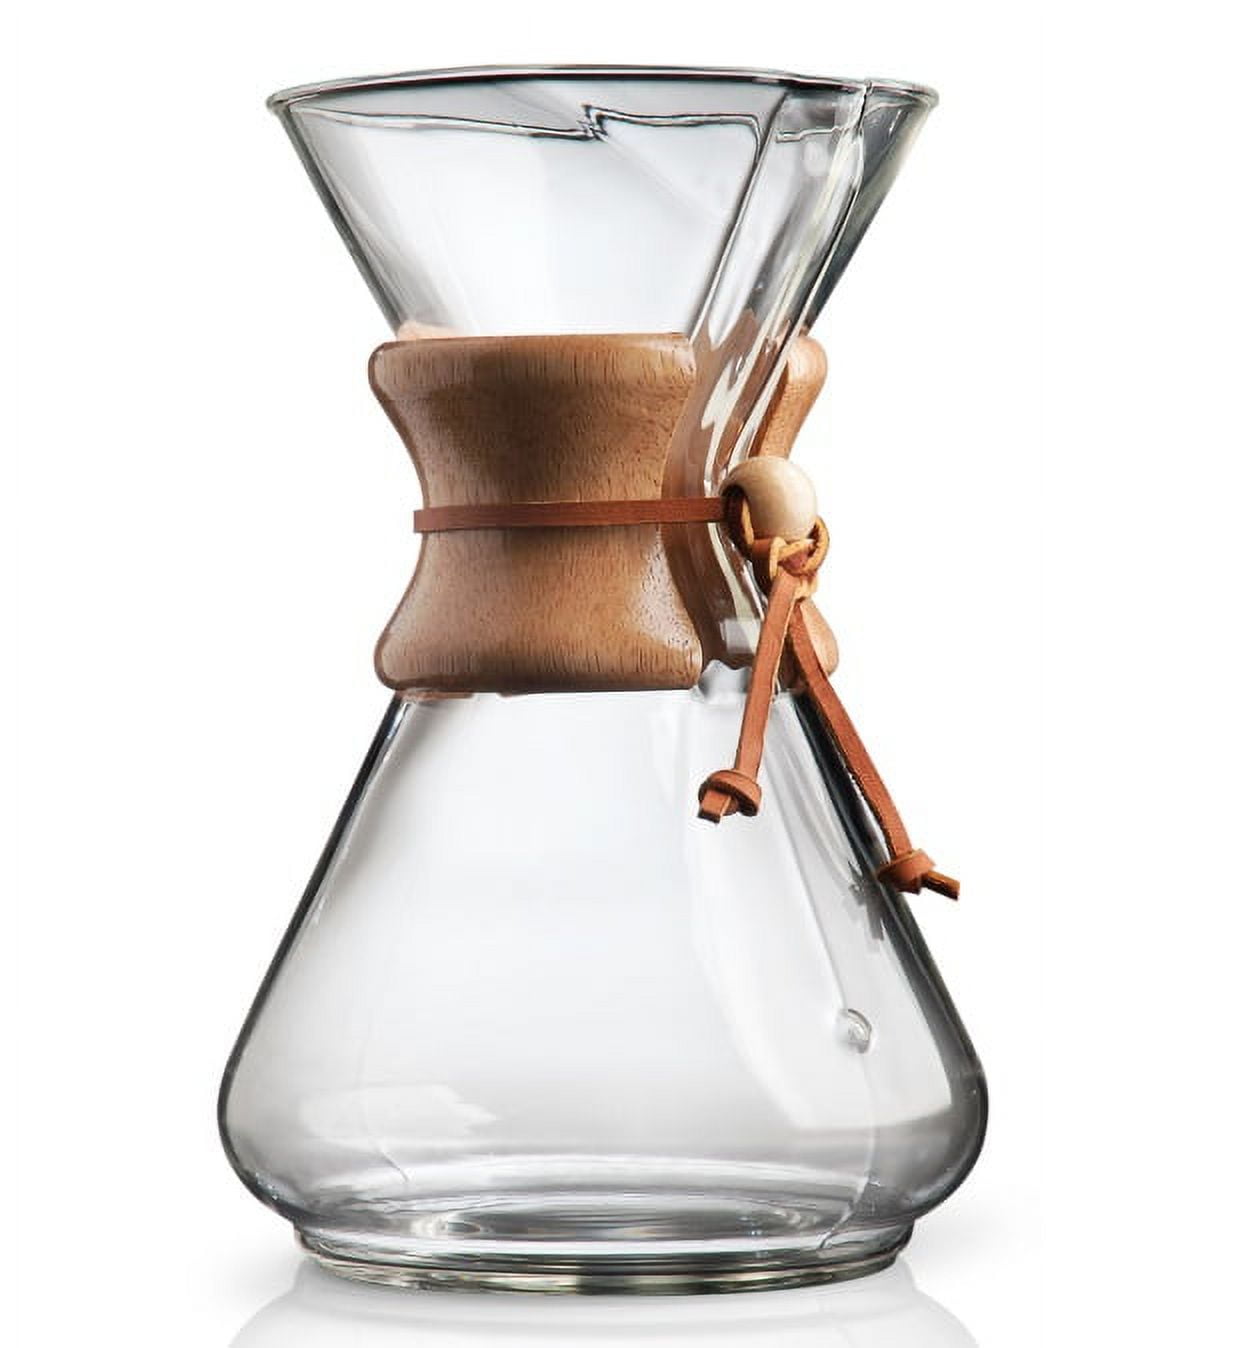 Secrets To A Spotless Chemex - How And When To Clean A Chemex Coffee Maker